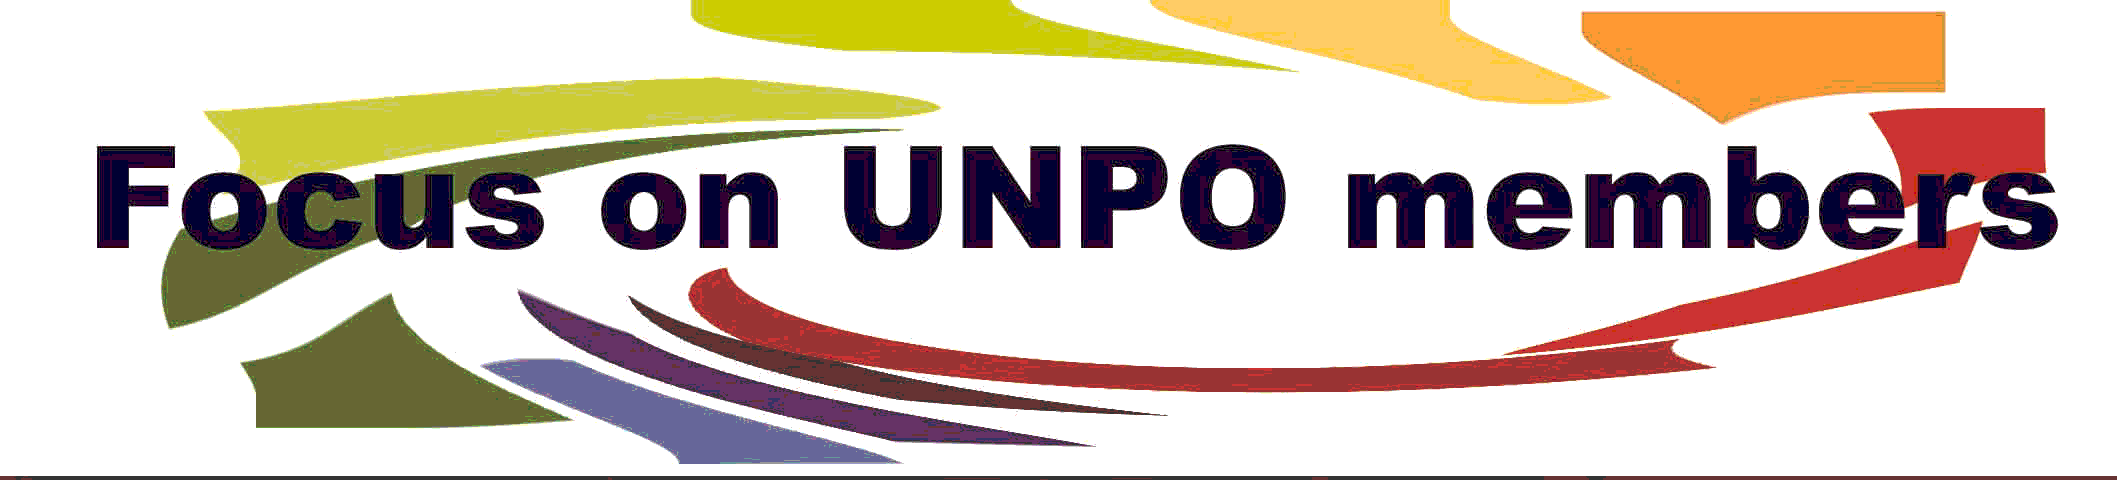 Click for forcus on UNPO members